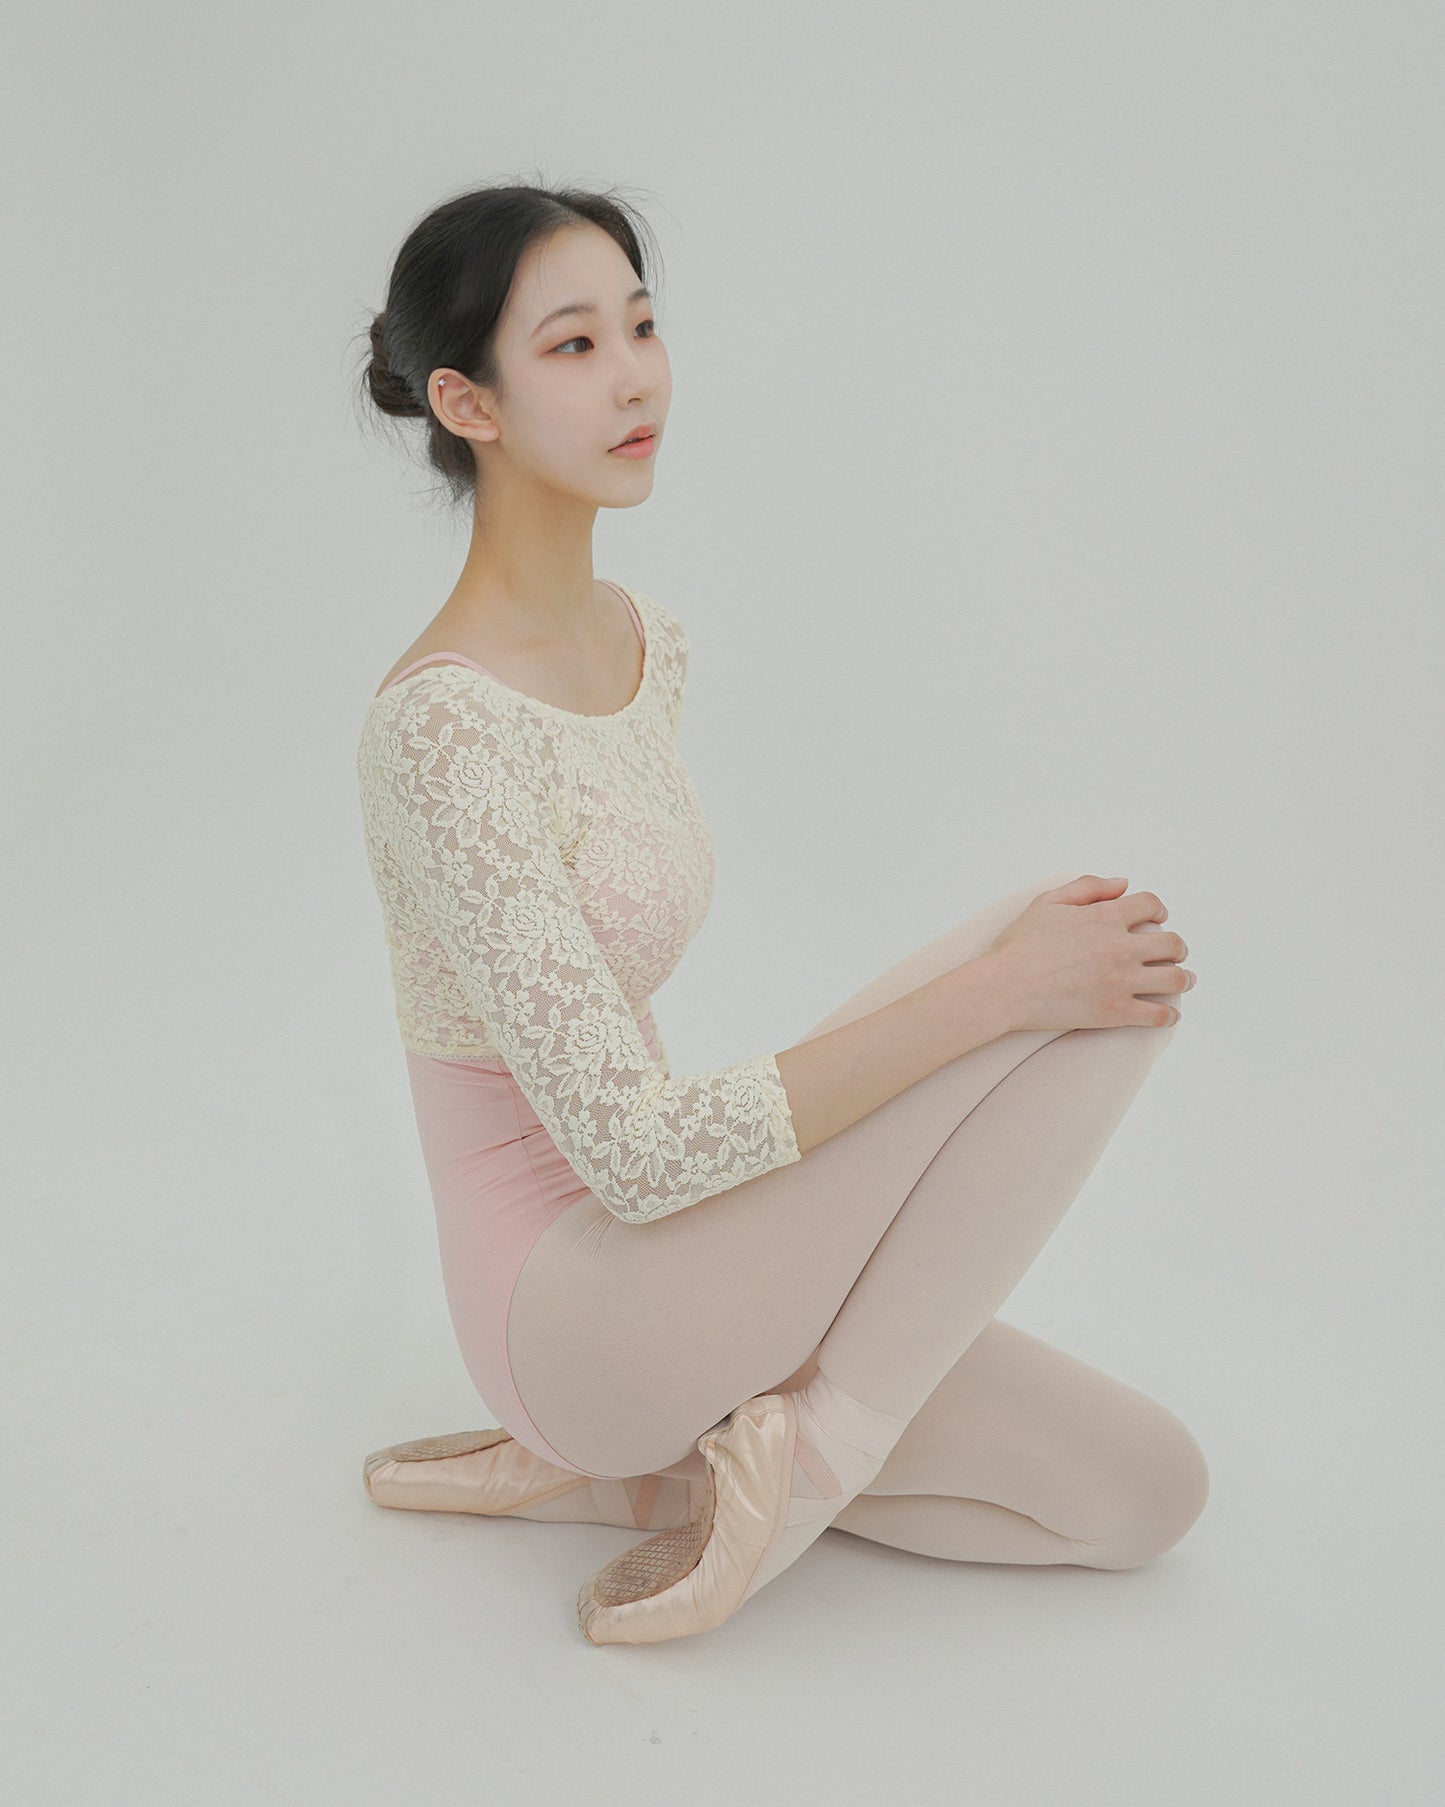 French Rose Lace Warmer top with 3/4 sleeves